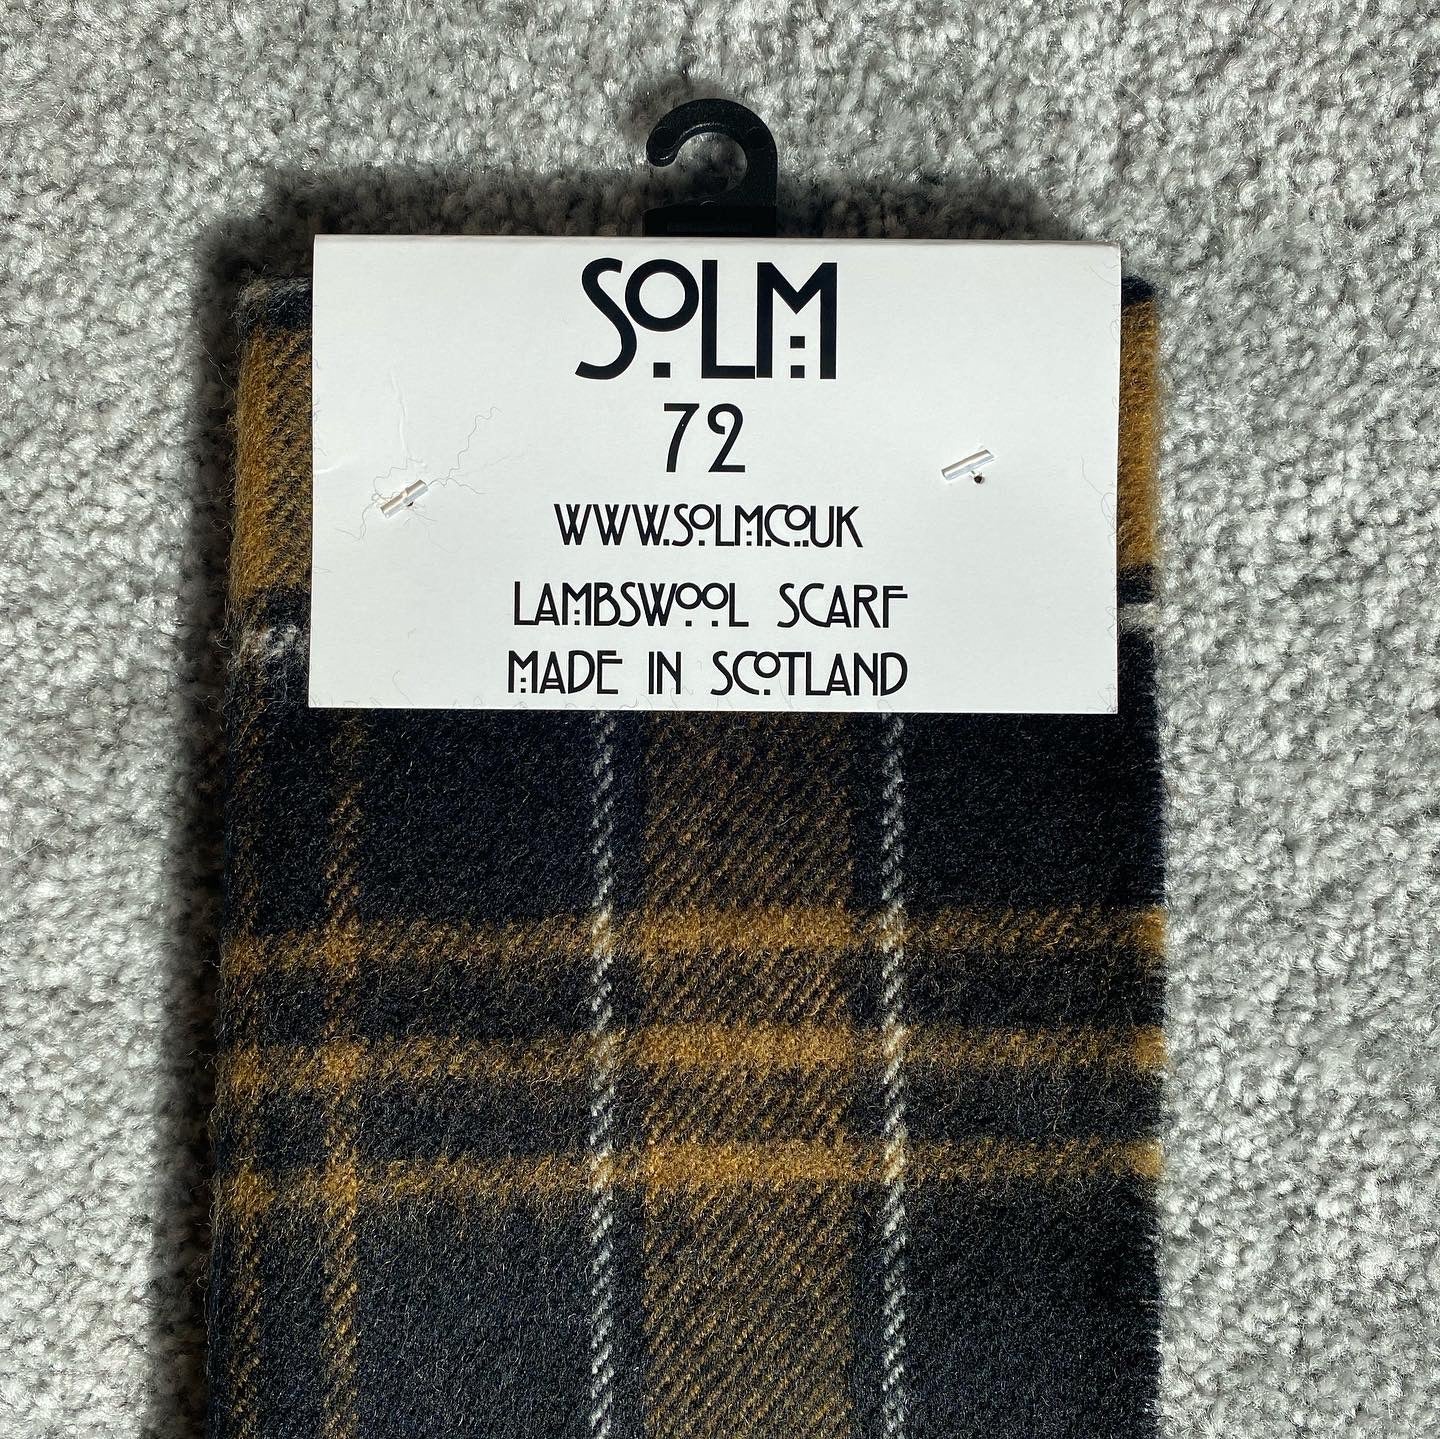 SOLM Lambswool Scarf (72)